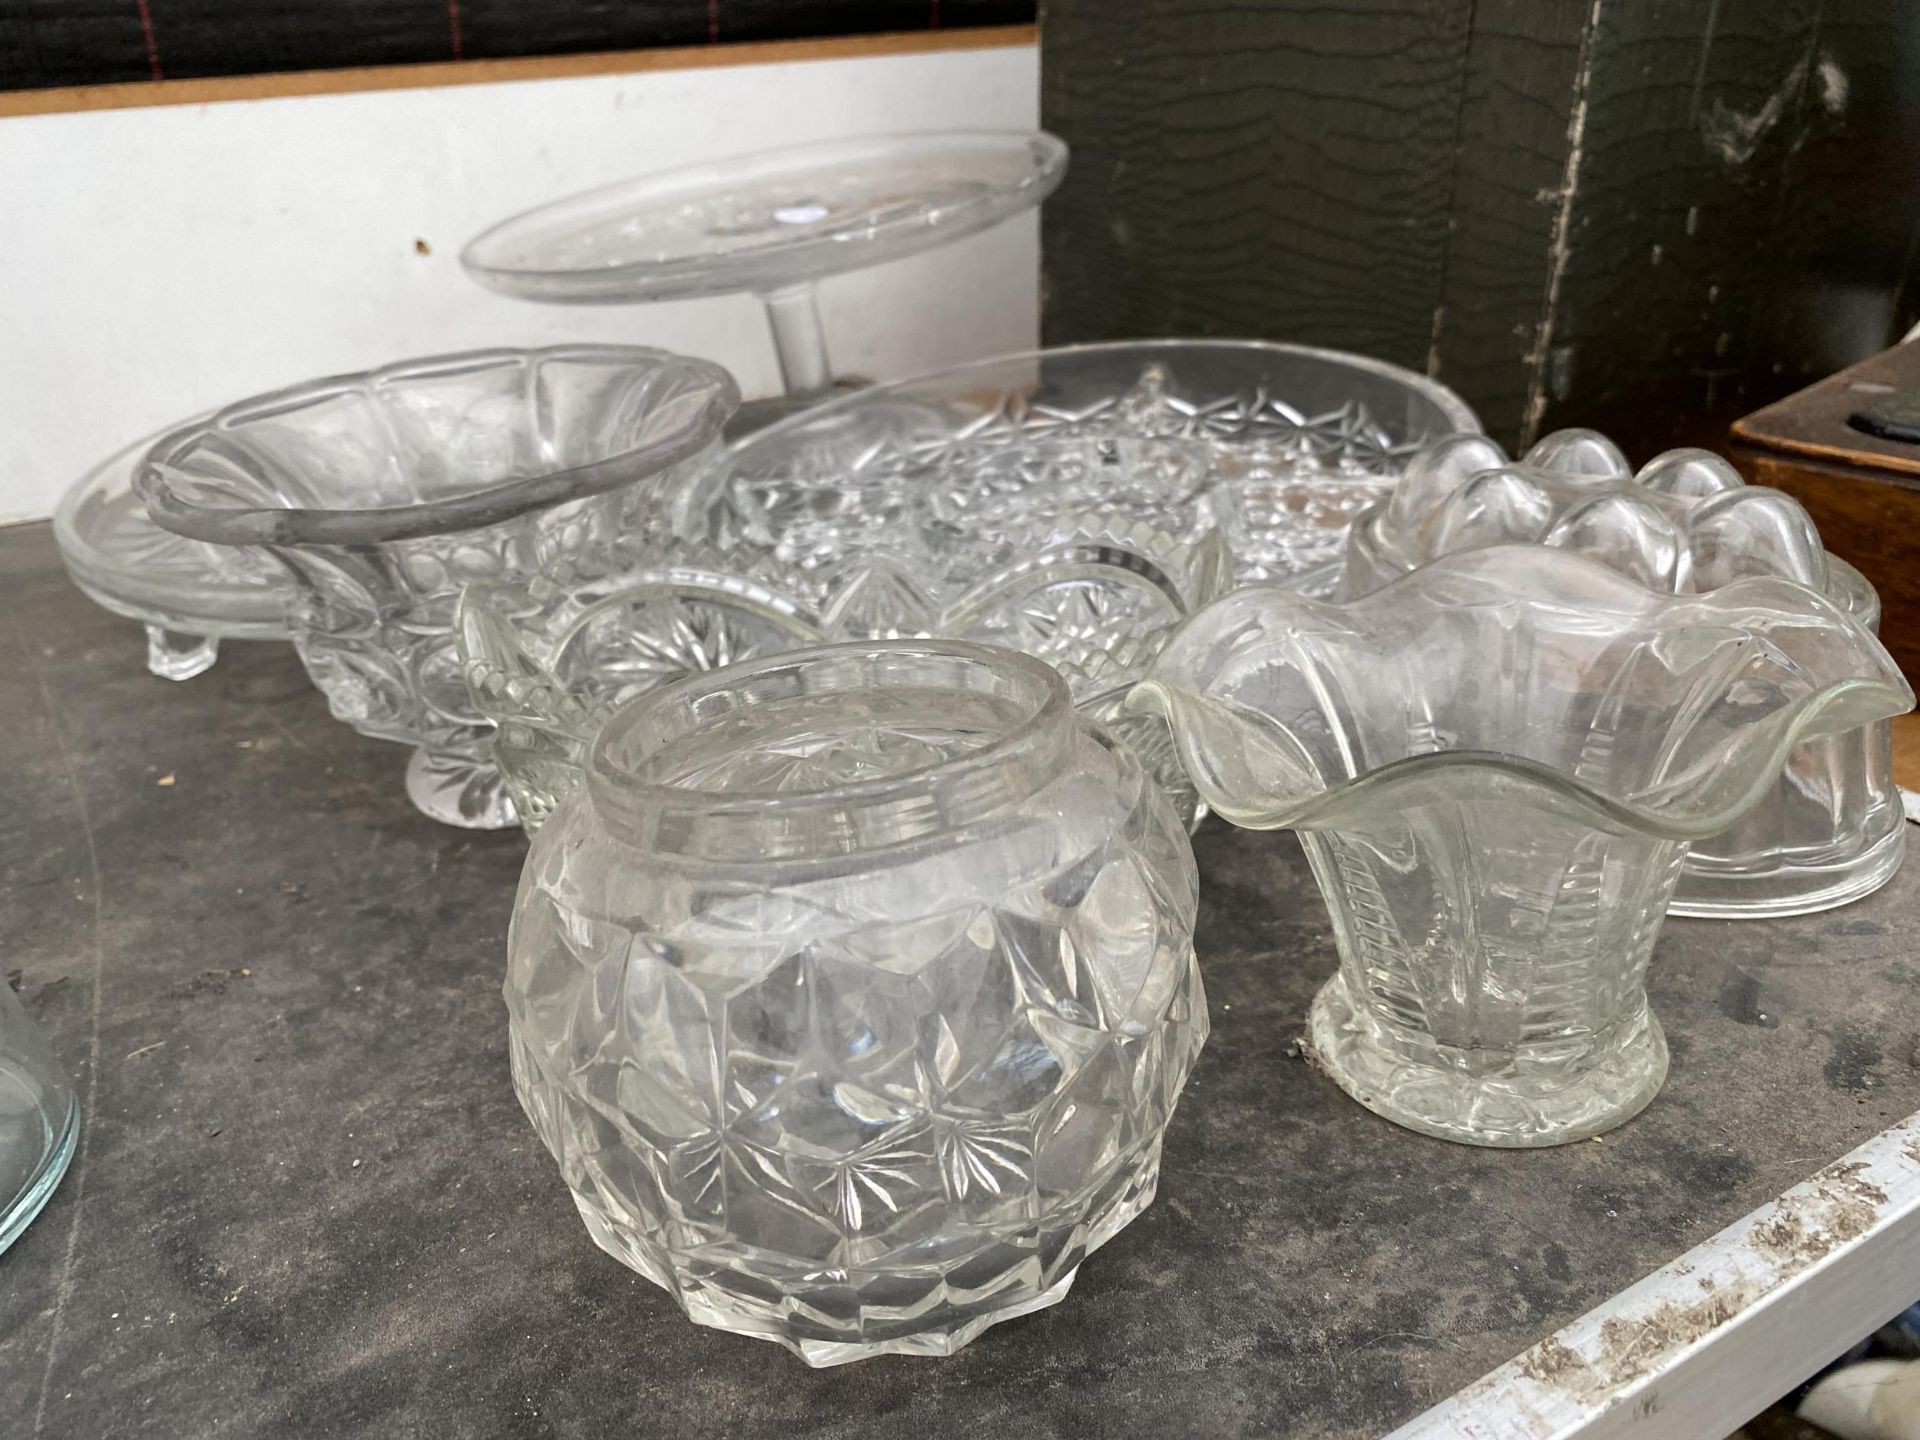 AN ASSORTMENT OF GLASS WARE TO INCLUDE A CAKE STAND AND TRINKET DISHES ETC - Image 2 of 3